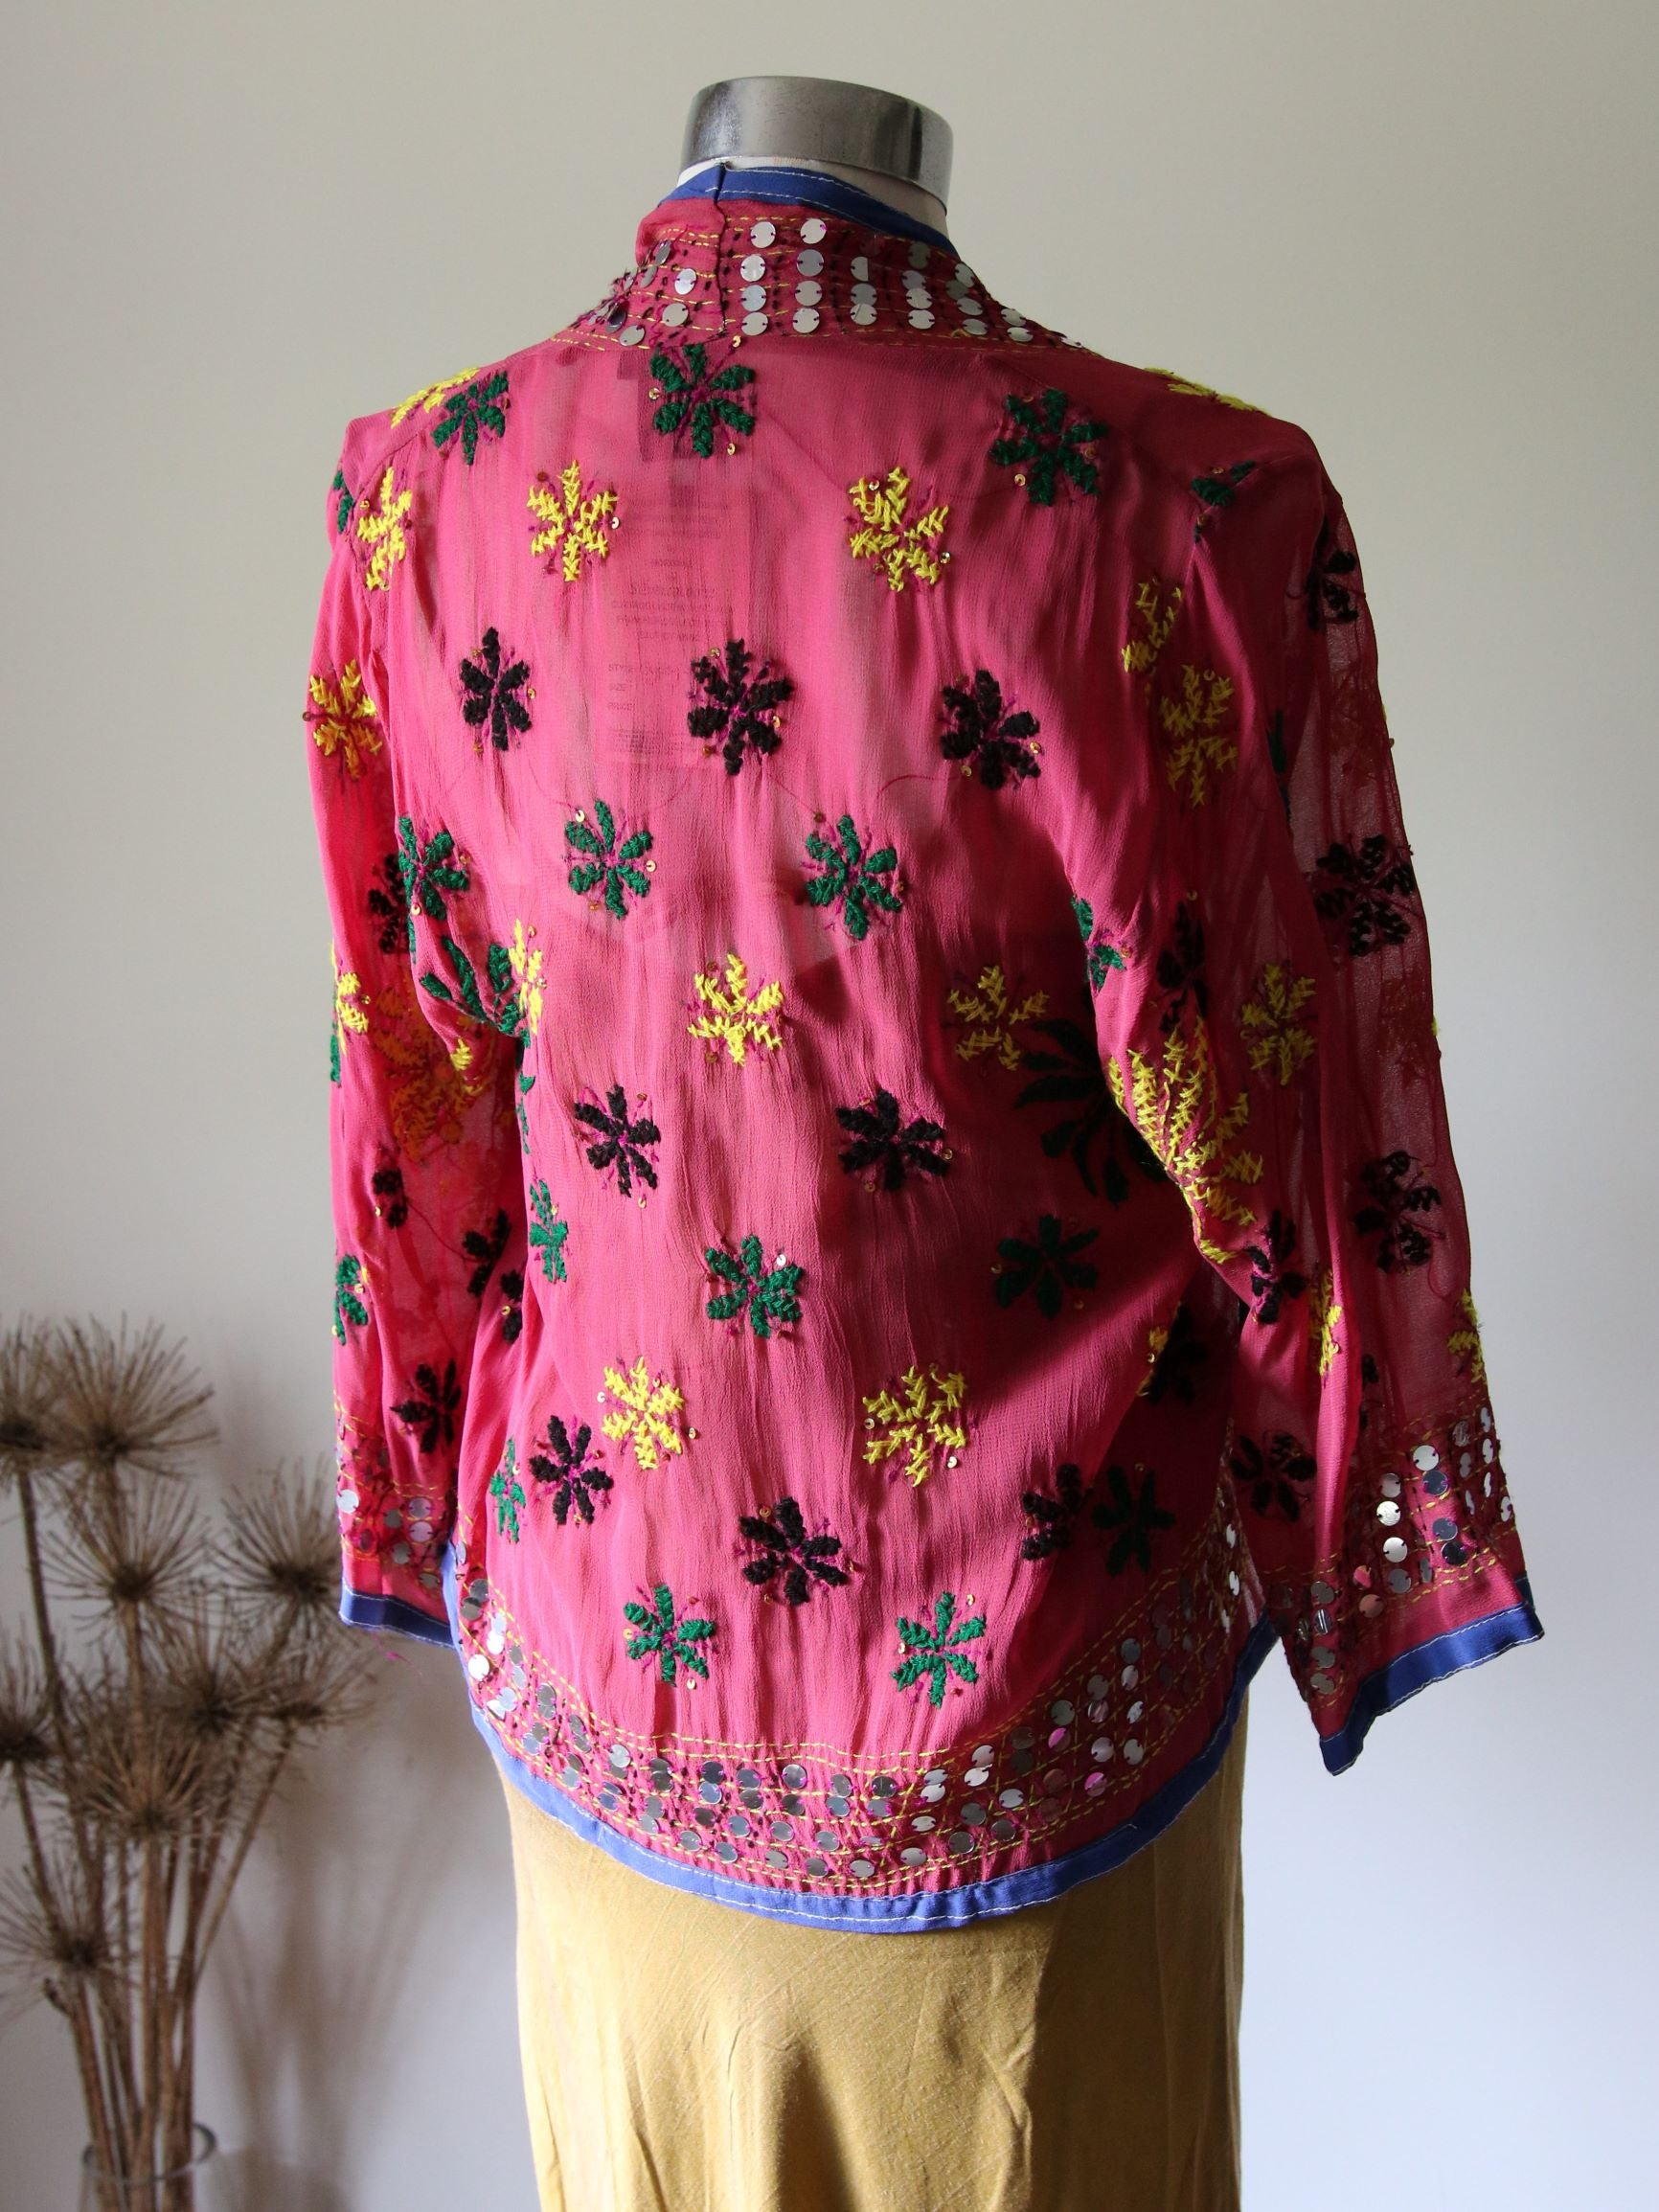 Rear view of pink gypsy jacket with hand embroidery